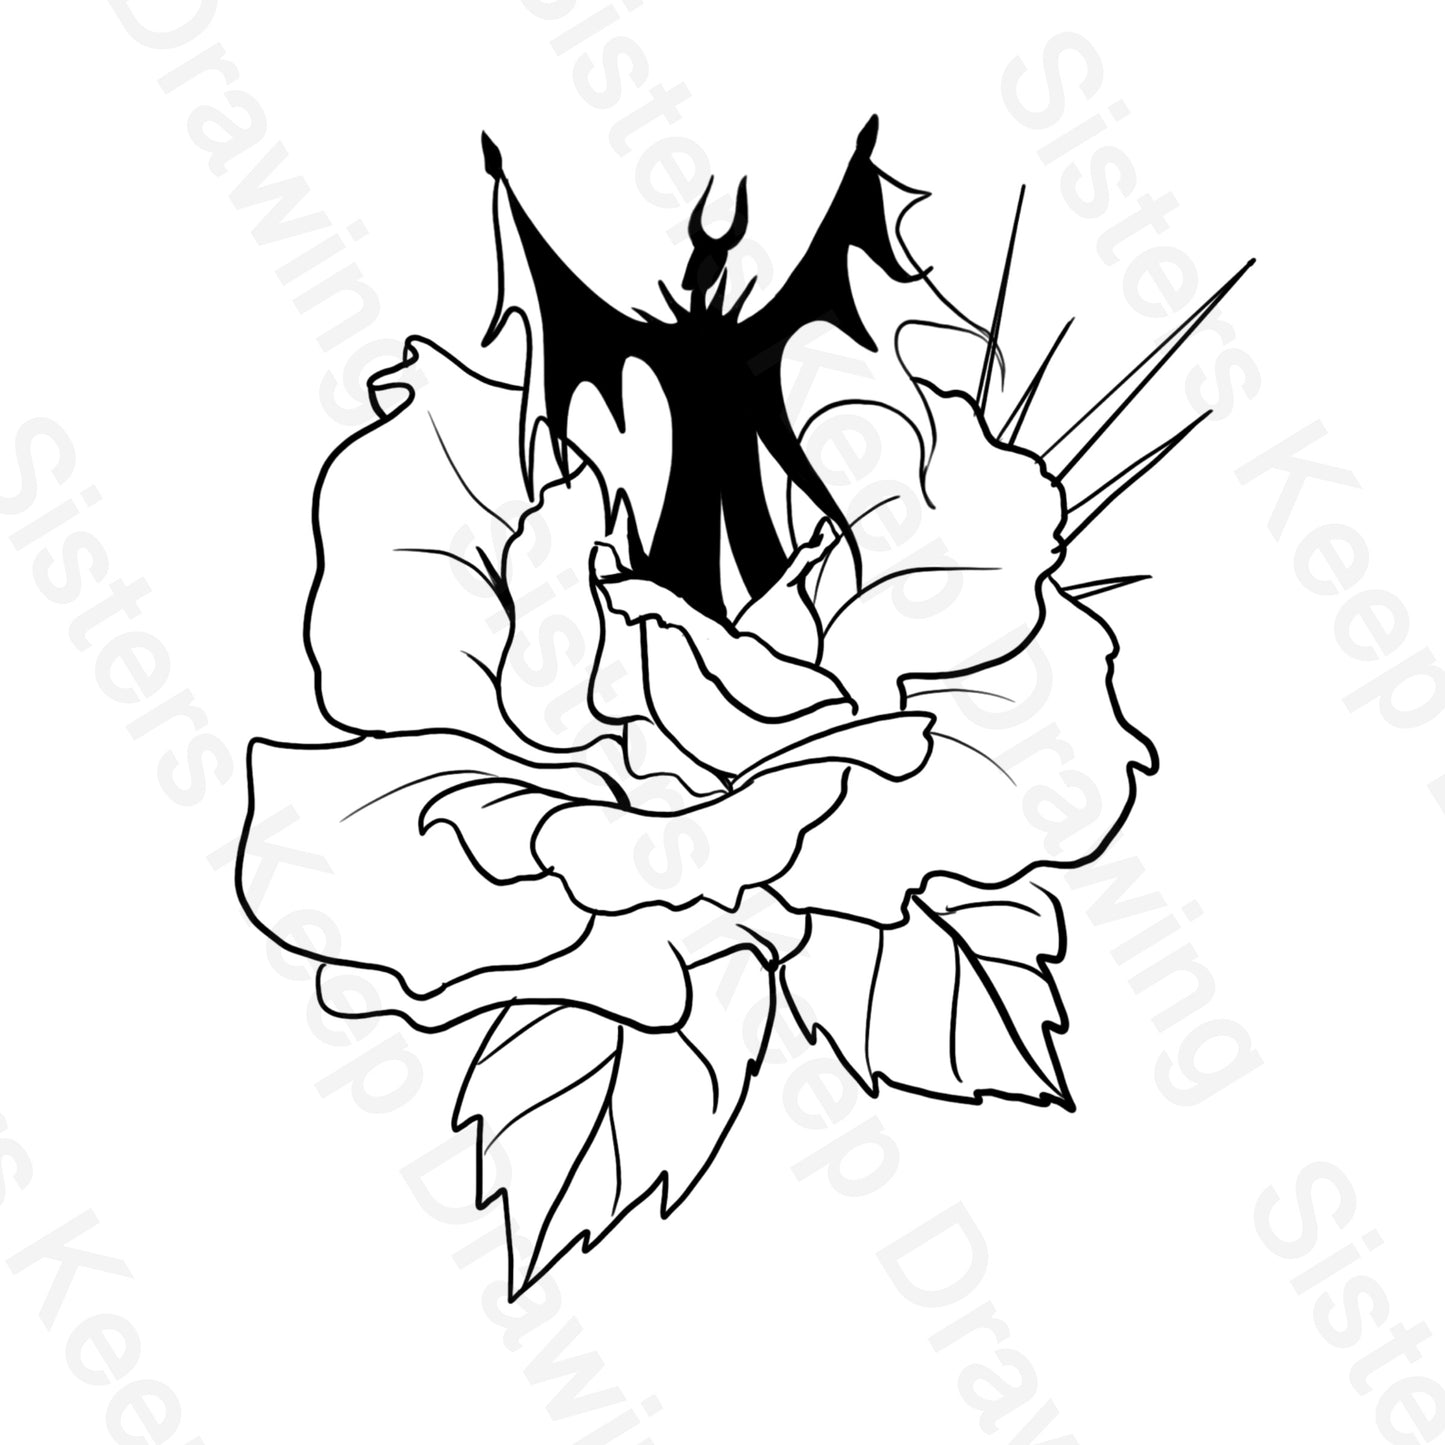 Maleficent in a Rose - Sleeping Beauty- Transparent Tattoo Permission PNG- instant download digital printable artwork